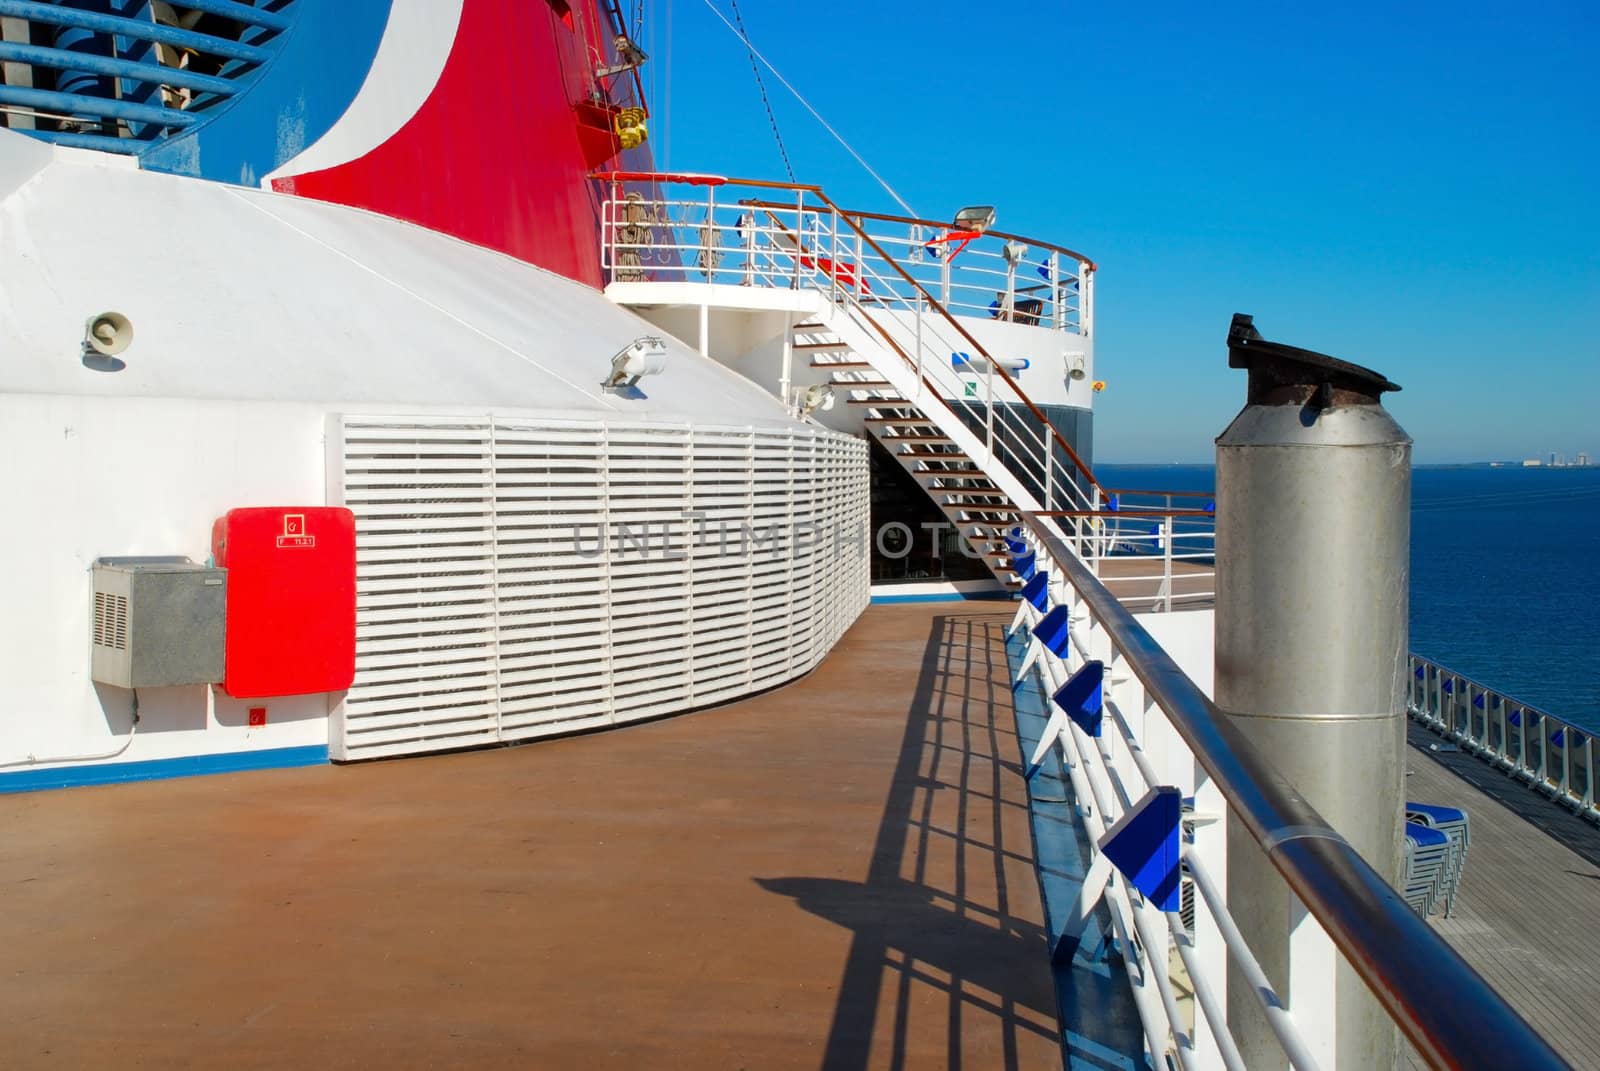 stock pictures of the deck on a cruise ship